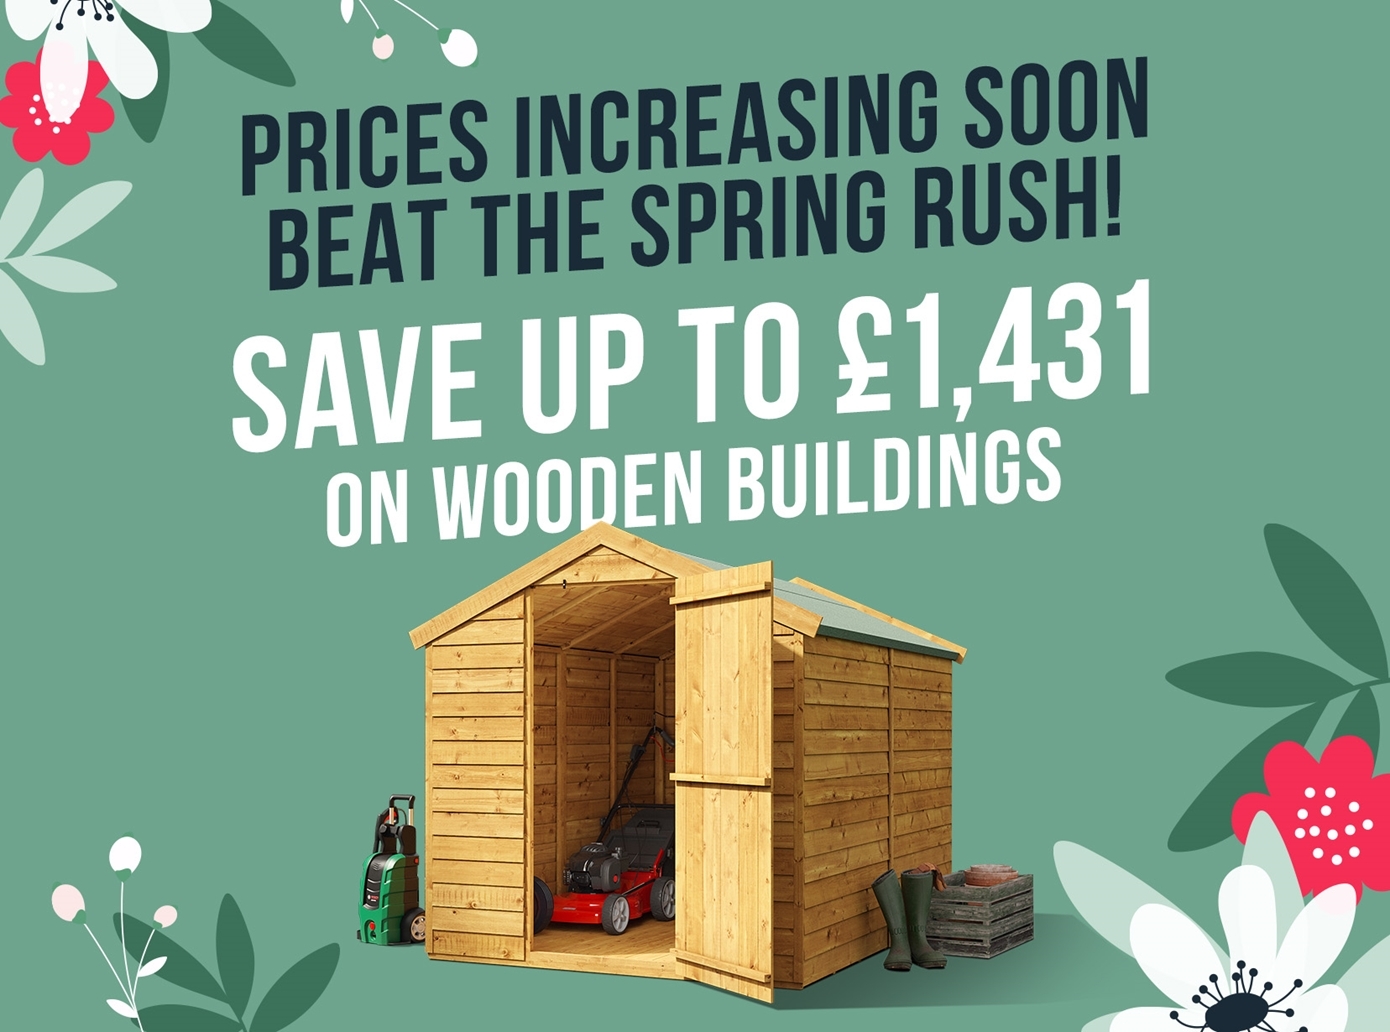 Save up to 1431 on wooden buildings